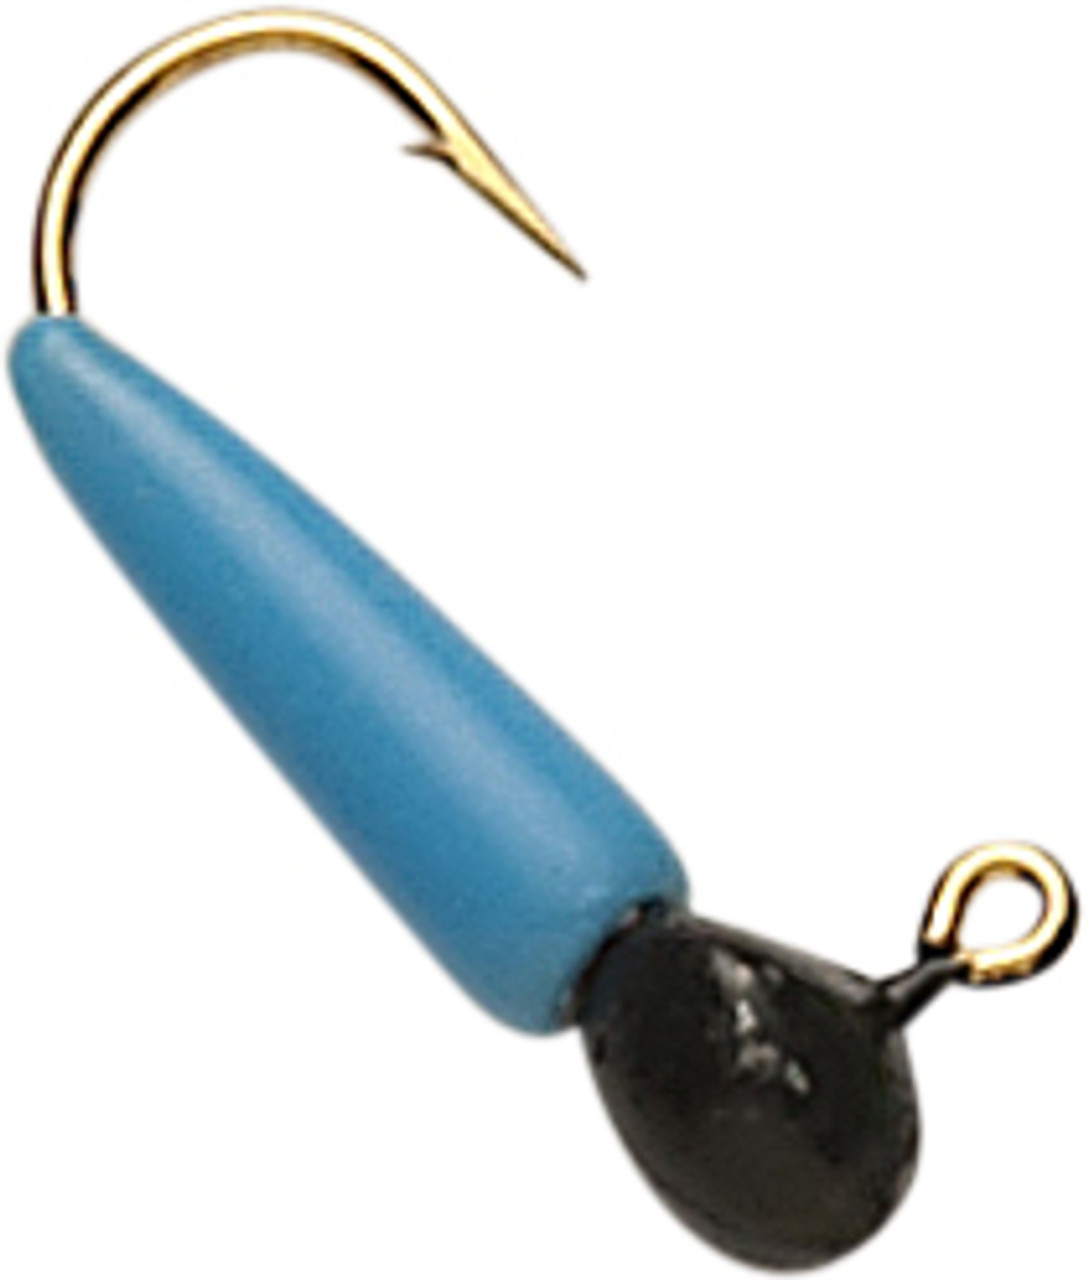 Buy Lead-Free Lures, Buy lead-free fishing weights, CANADA